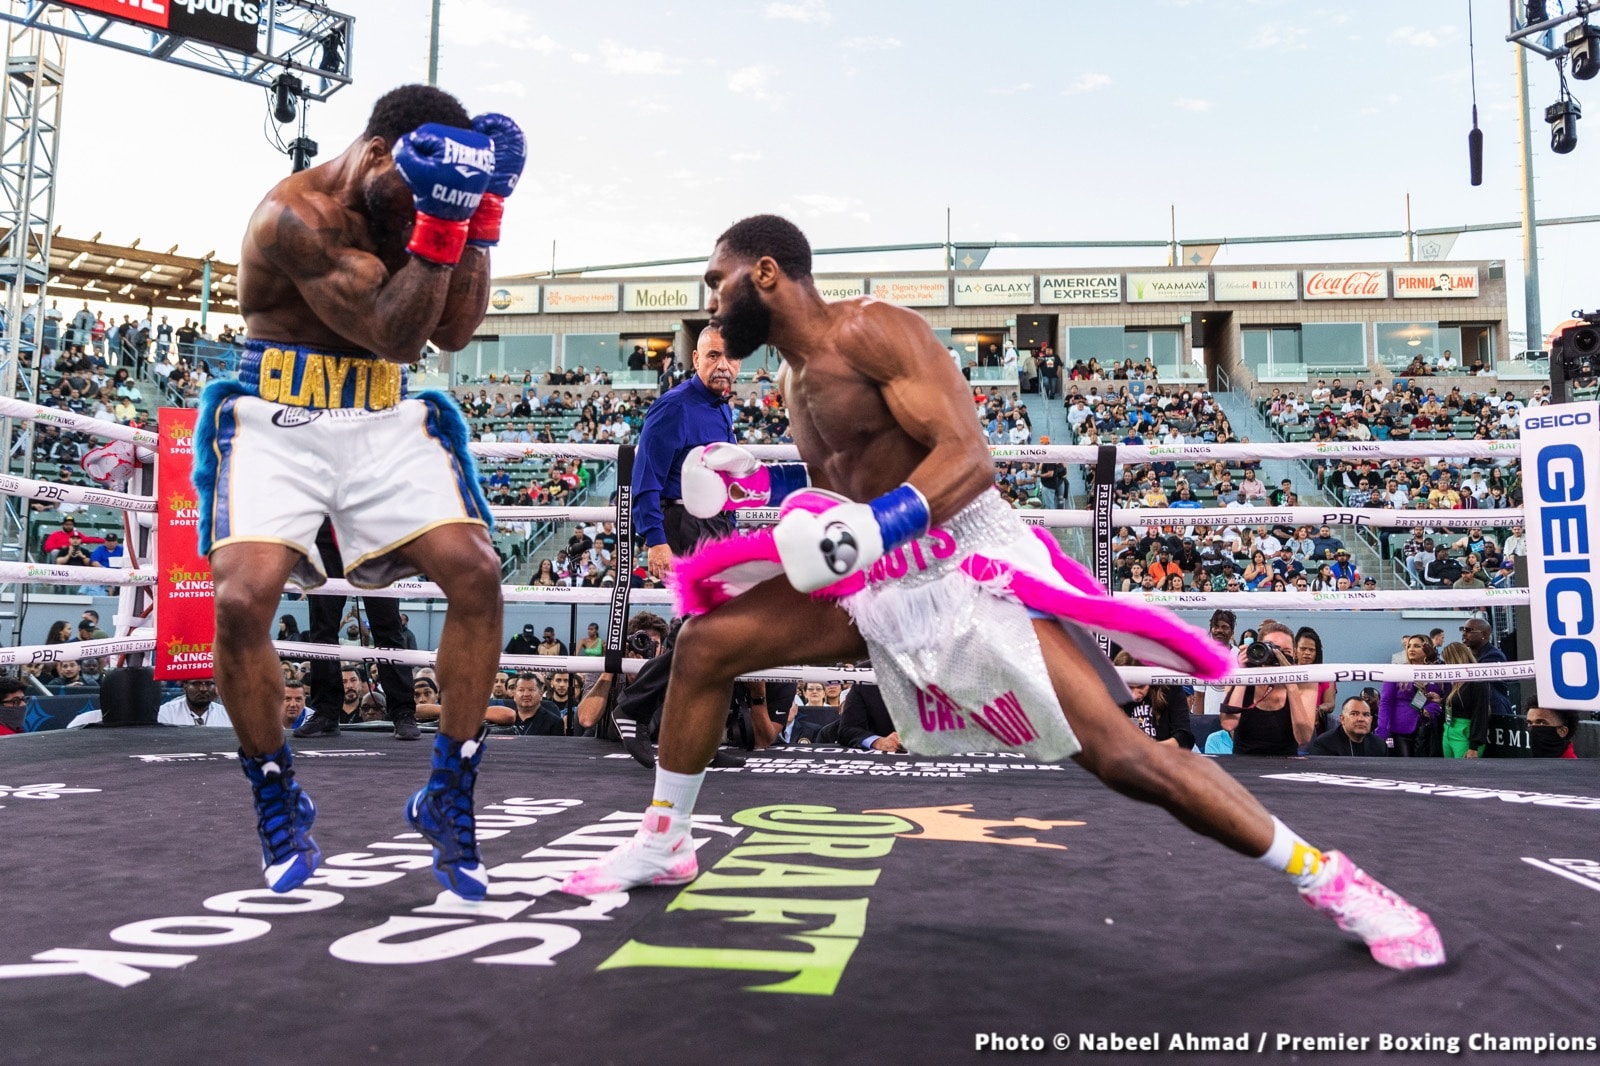 Image: Boxing Results: Jermell “Iron Man” Charlo & Jaron “Boots” Ennis Win By KO!